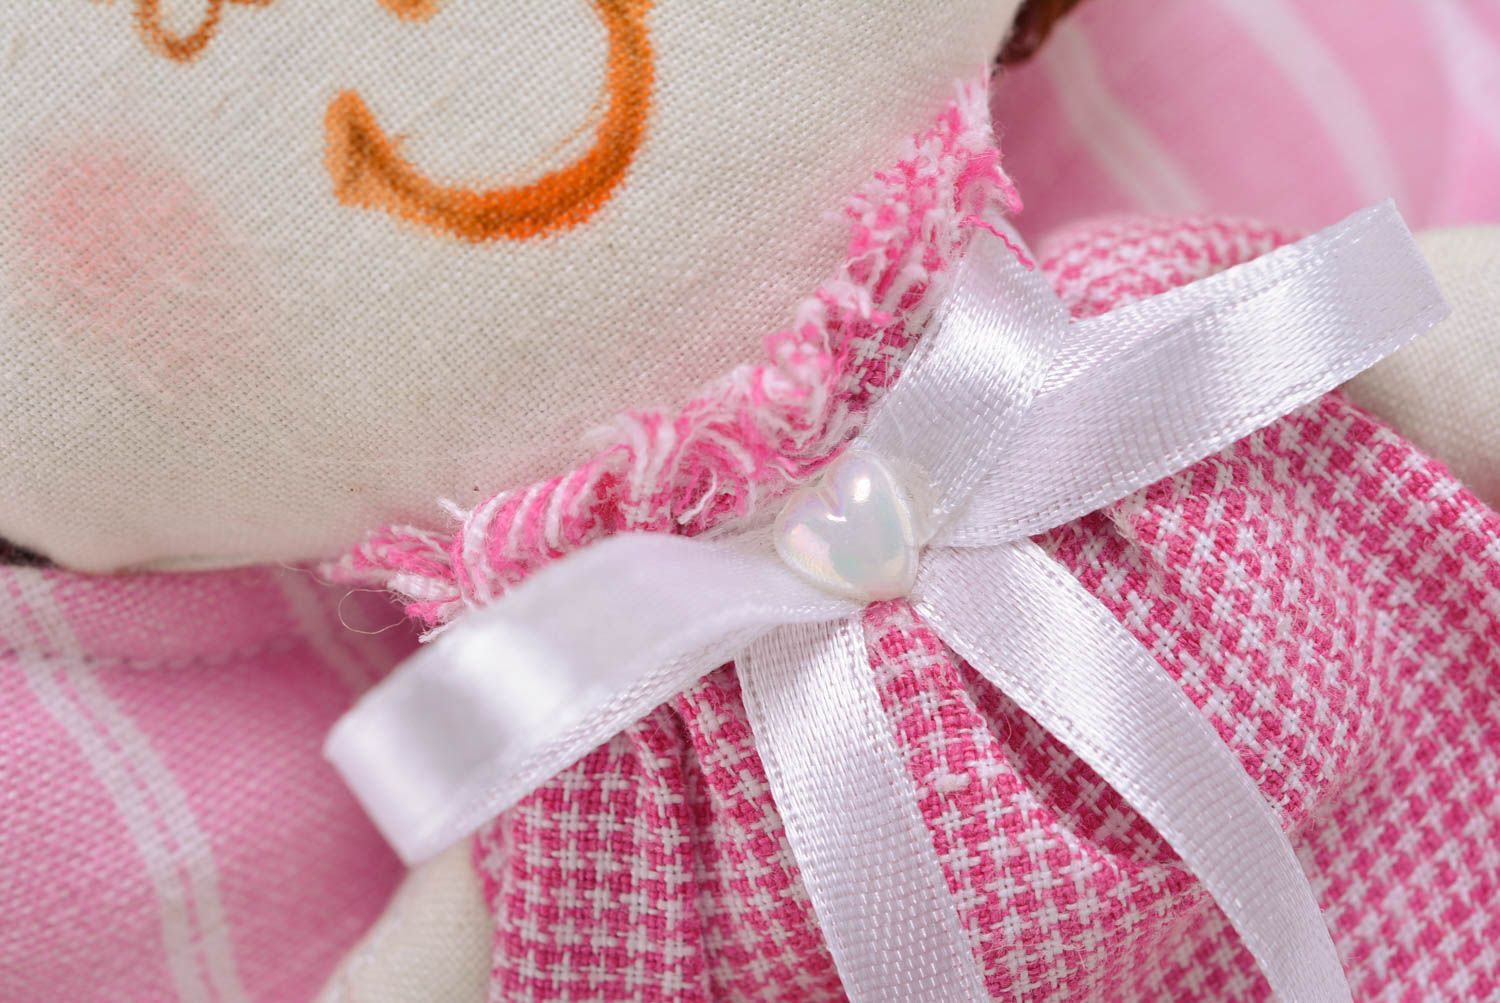 Handmade soft toy sewn of cotton fabric in the shape of angel girl in pink dress photo 5